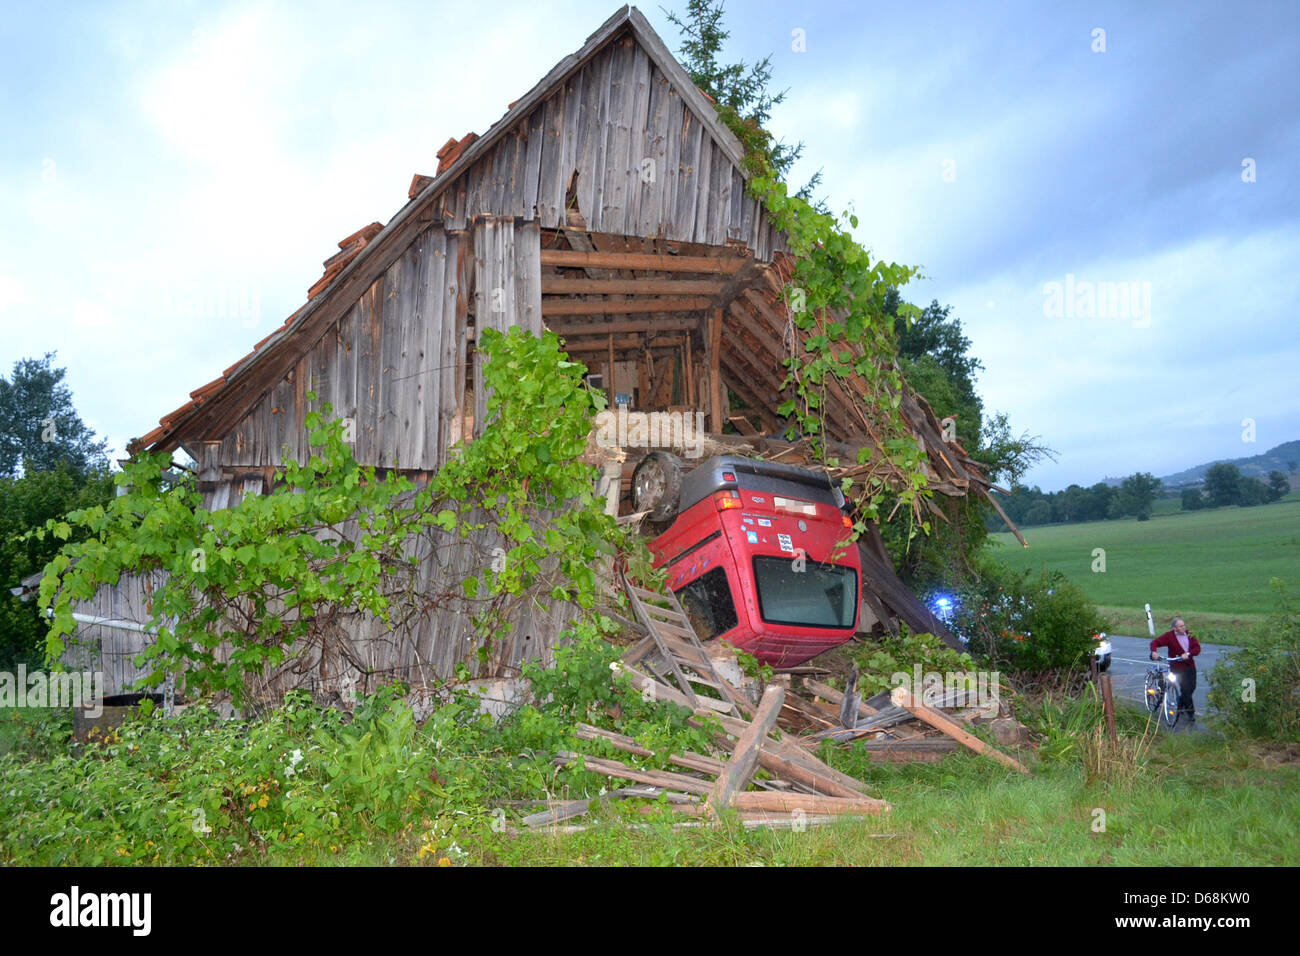 Fire fighters stand in front of a barn into which a red mimi van has  crashed near Kulmbach, Germany, 18 July 2012. An 18 year old driver was  involved in an accident